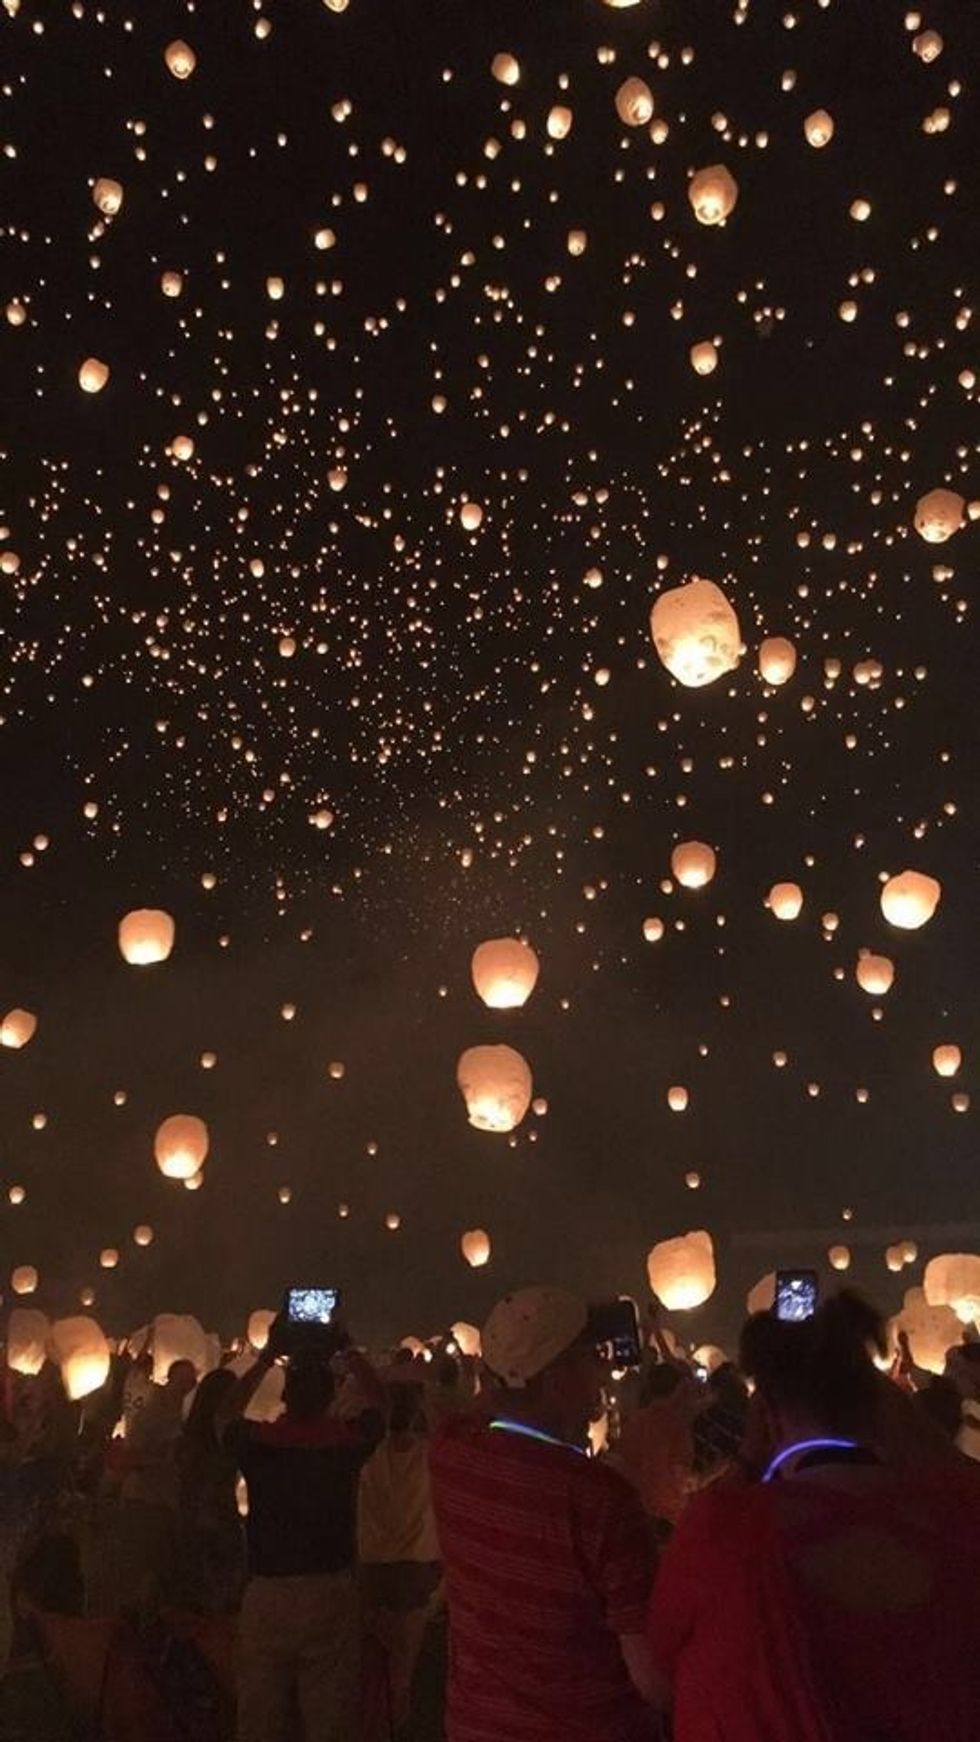 Lantern Fest Is One Of The Most Important Traditions That My Boyfriend And I Have As A Couple